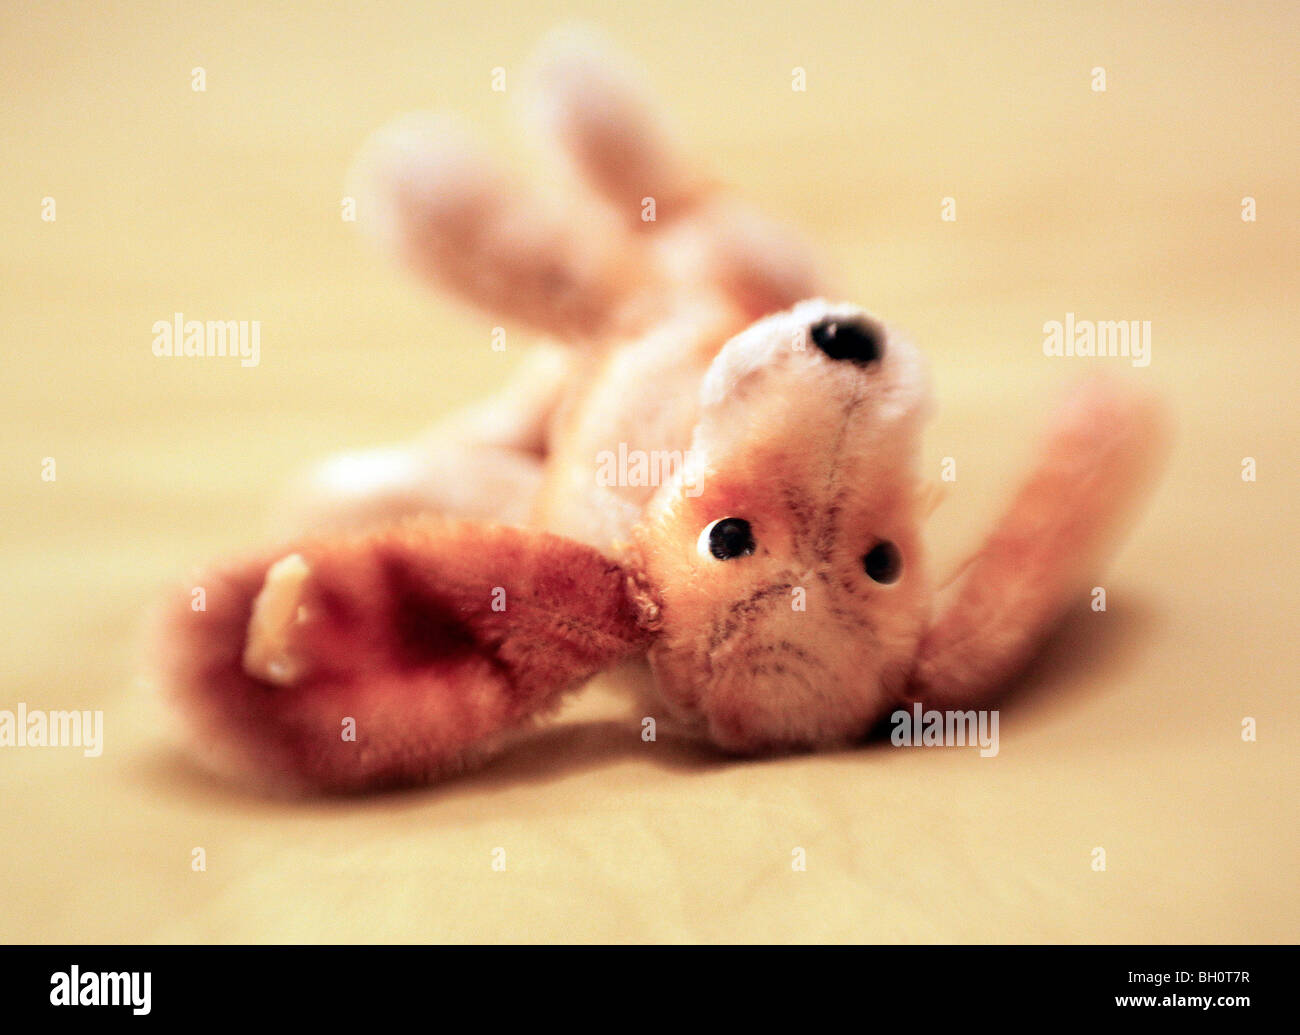 Cuddly toy dog pictured with a lensbaby Stock Photo